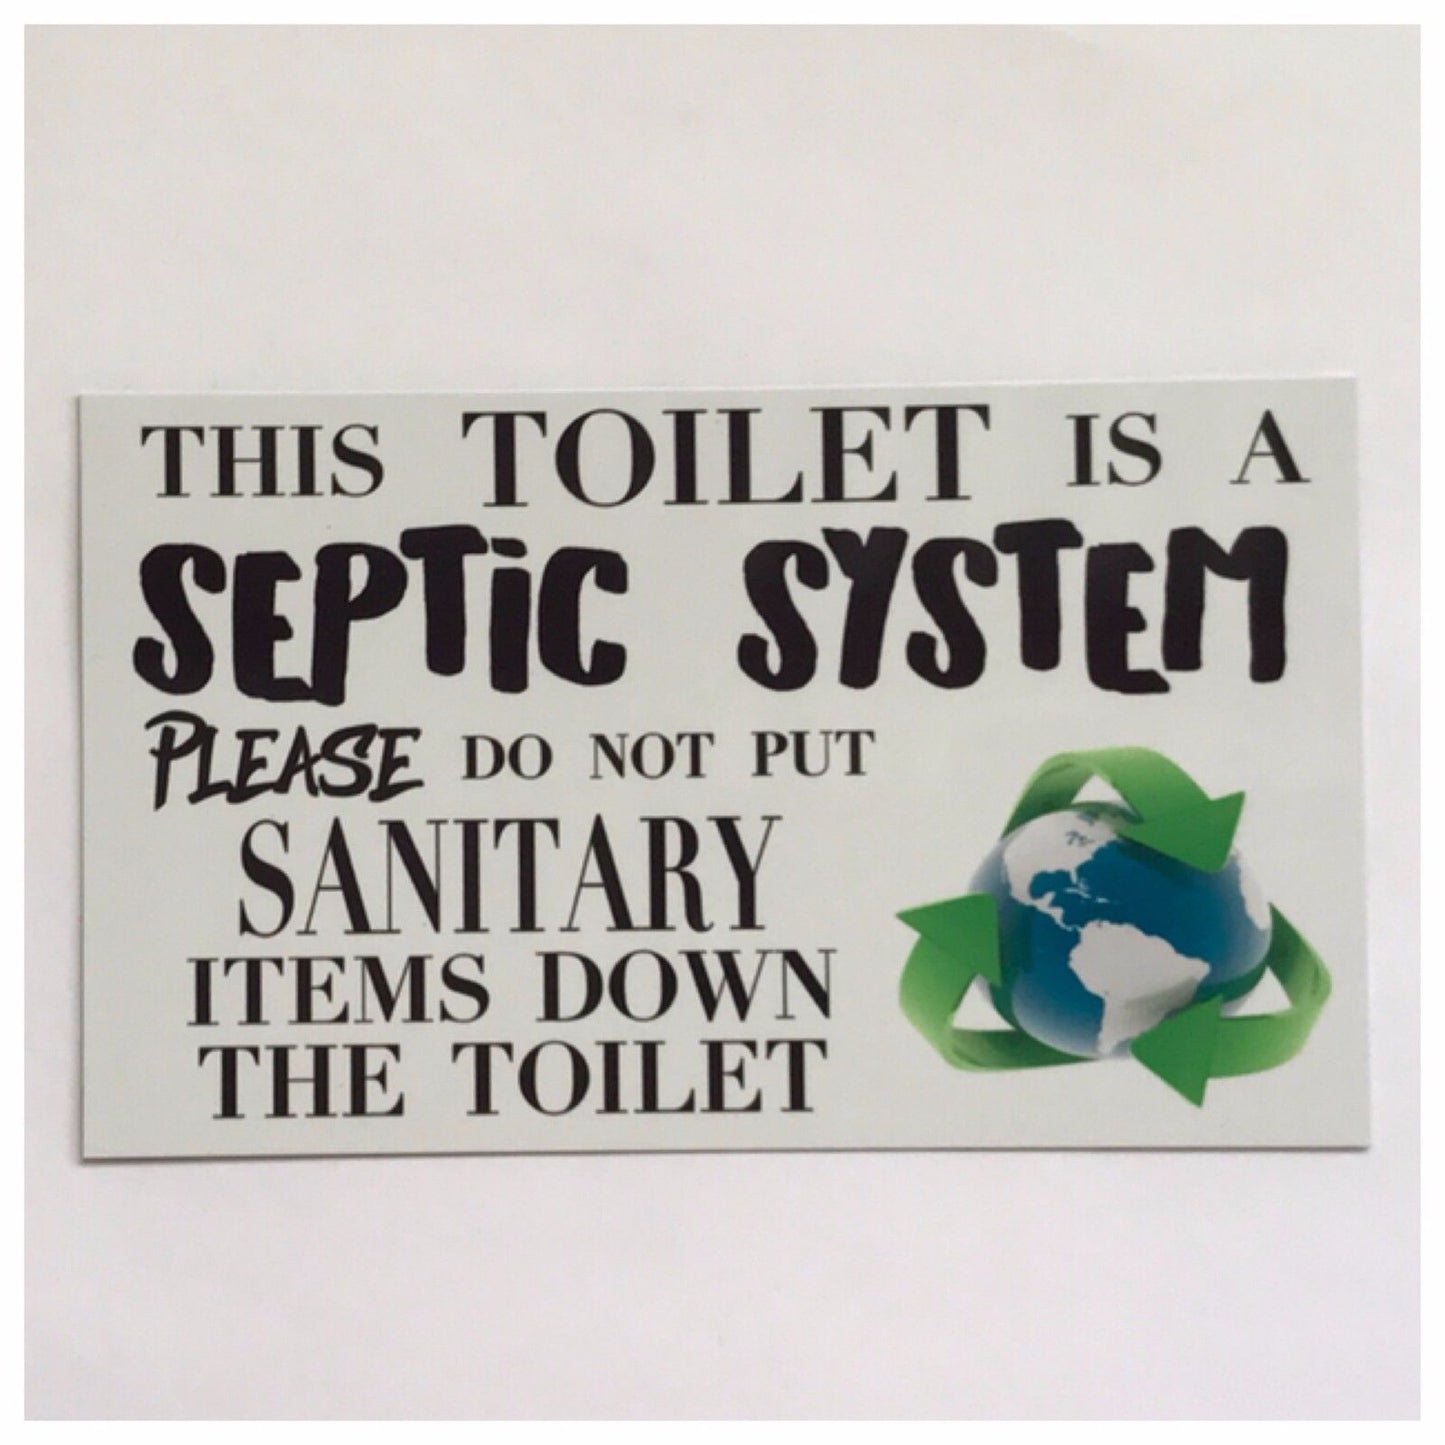 Toilet Septic System Bathroom Sign